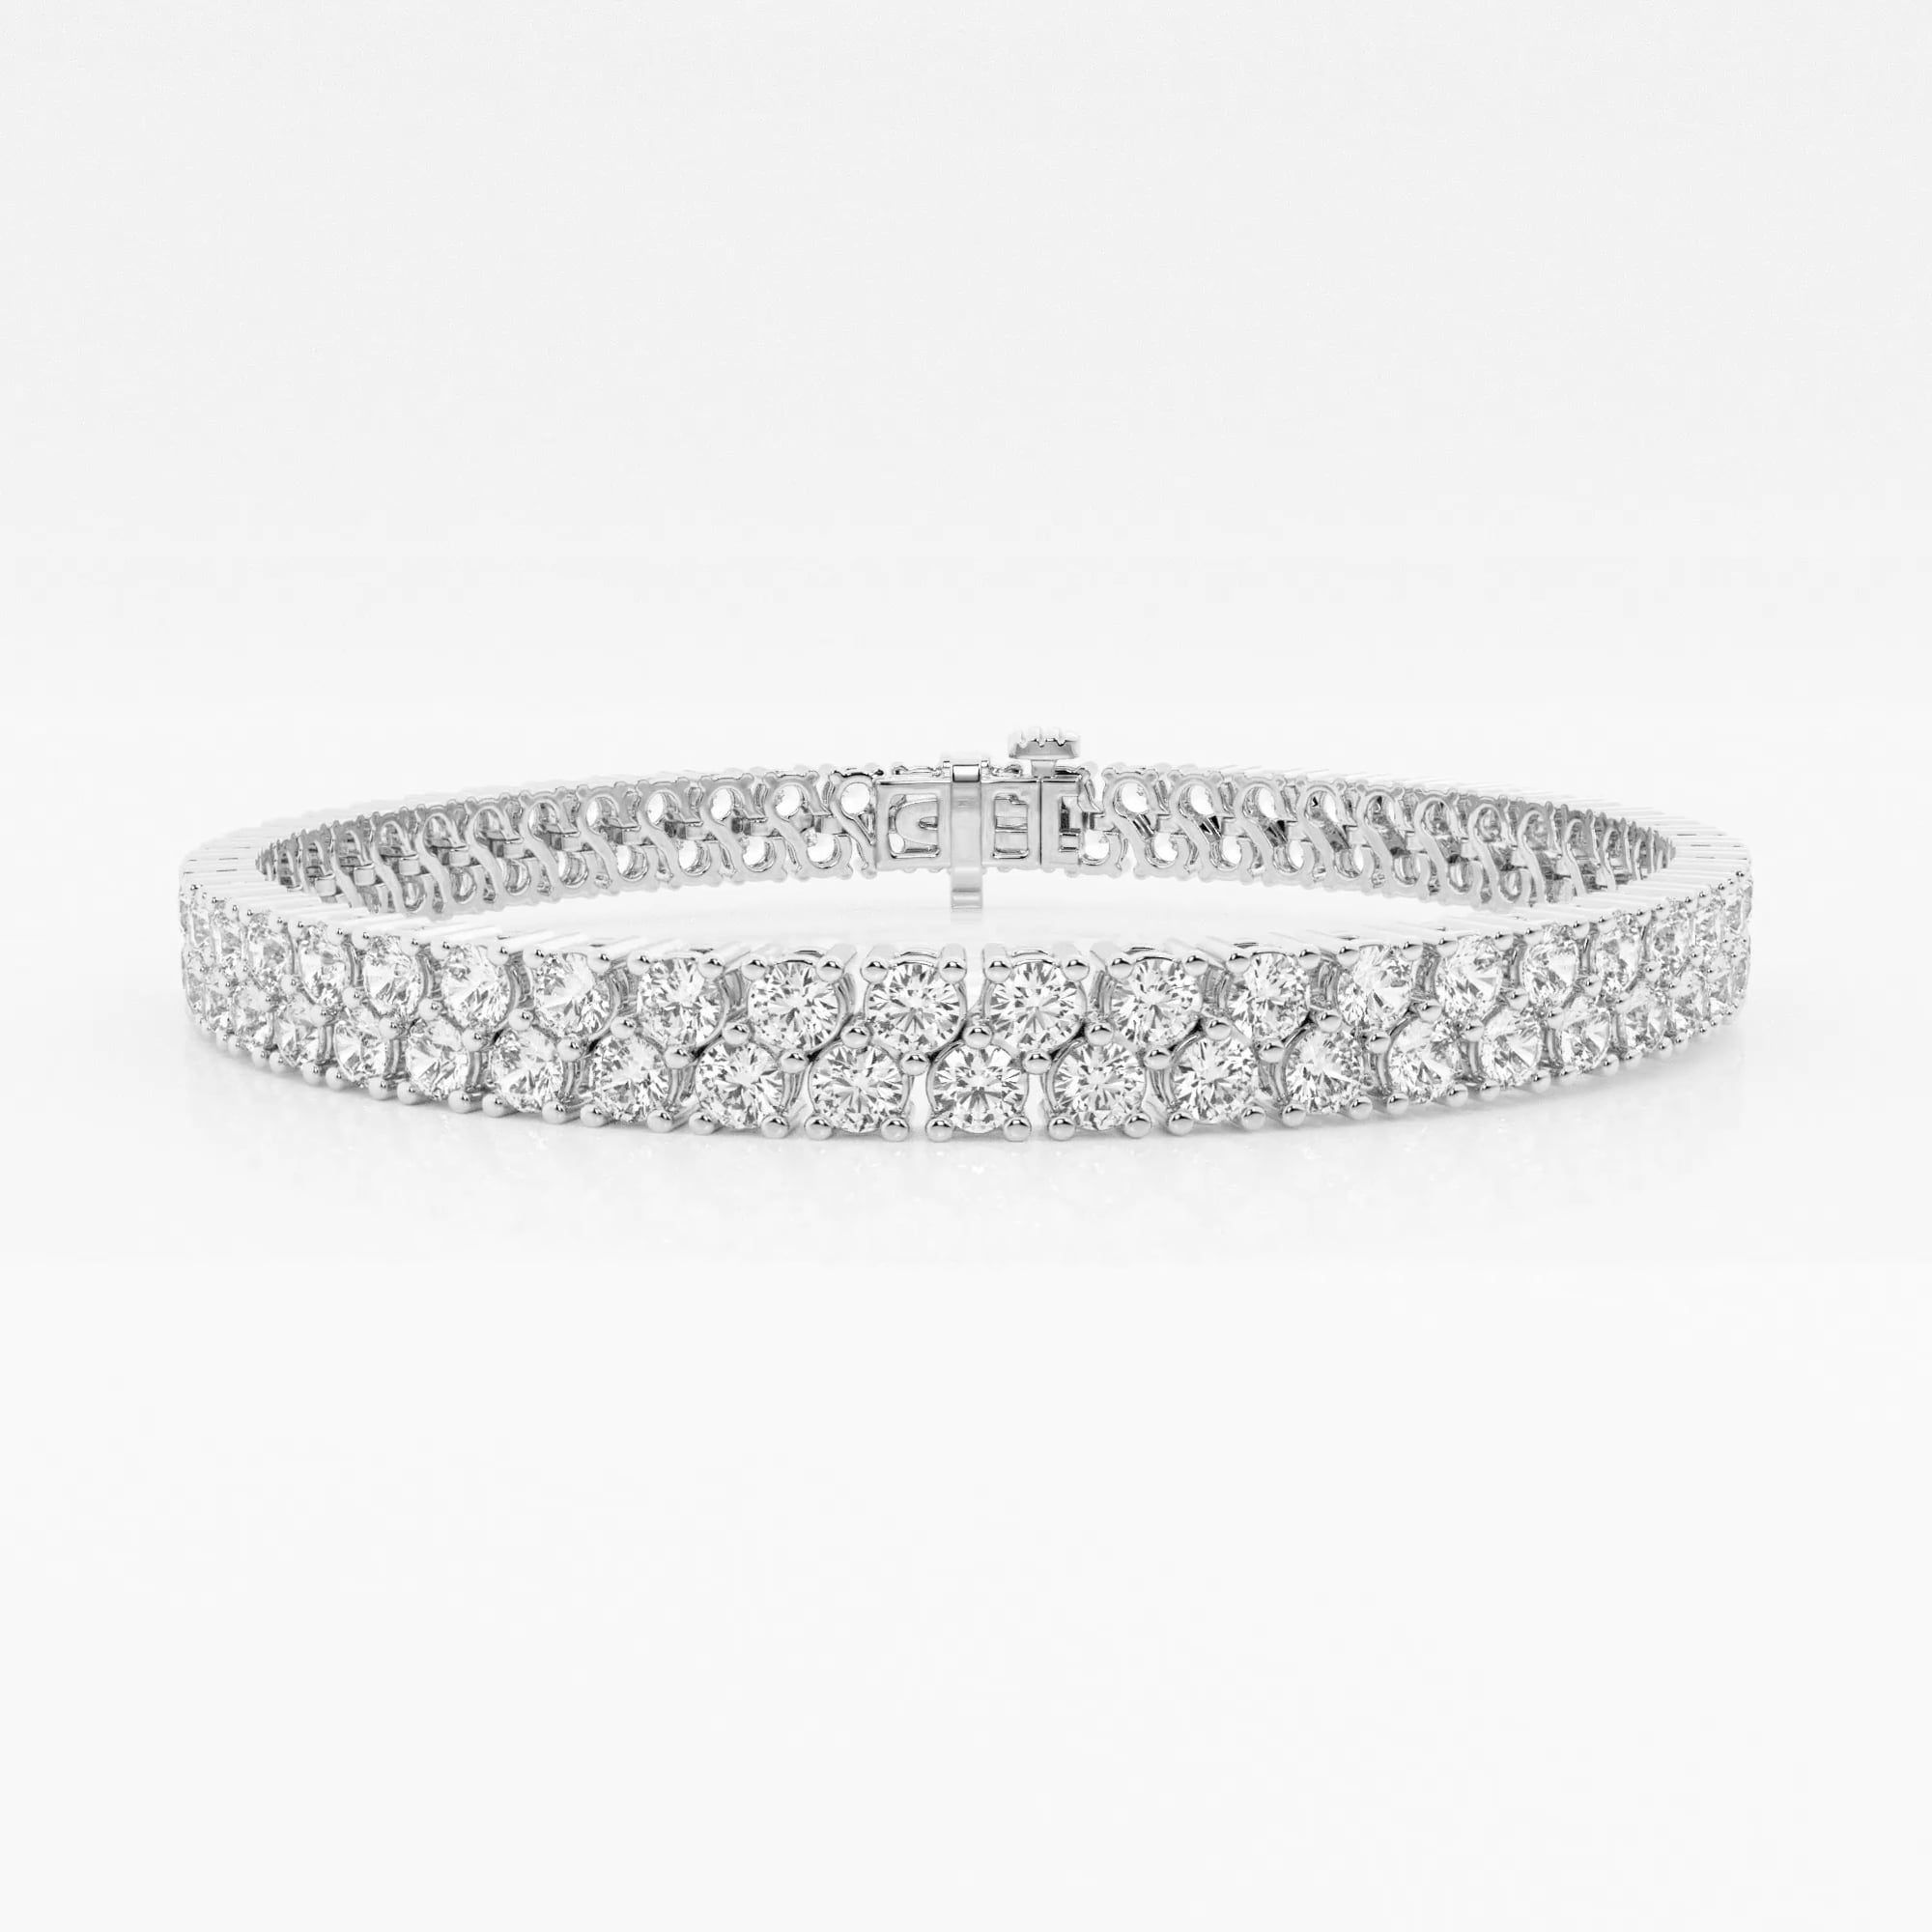 product video for 10 ctw Round Lab Grown Diamond Double Row Fashion Bracelet - 7.25 Inches